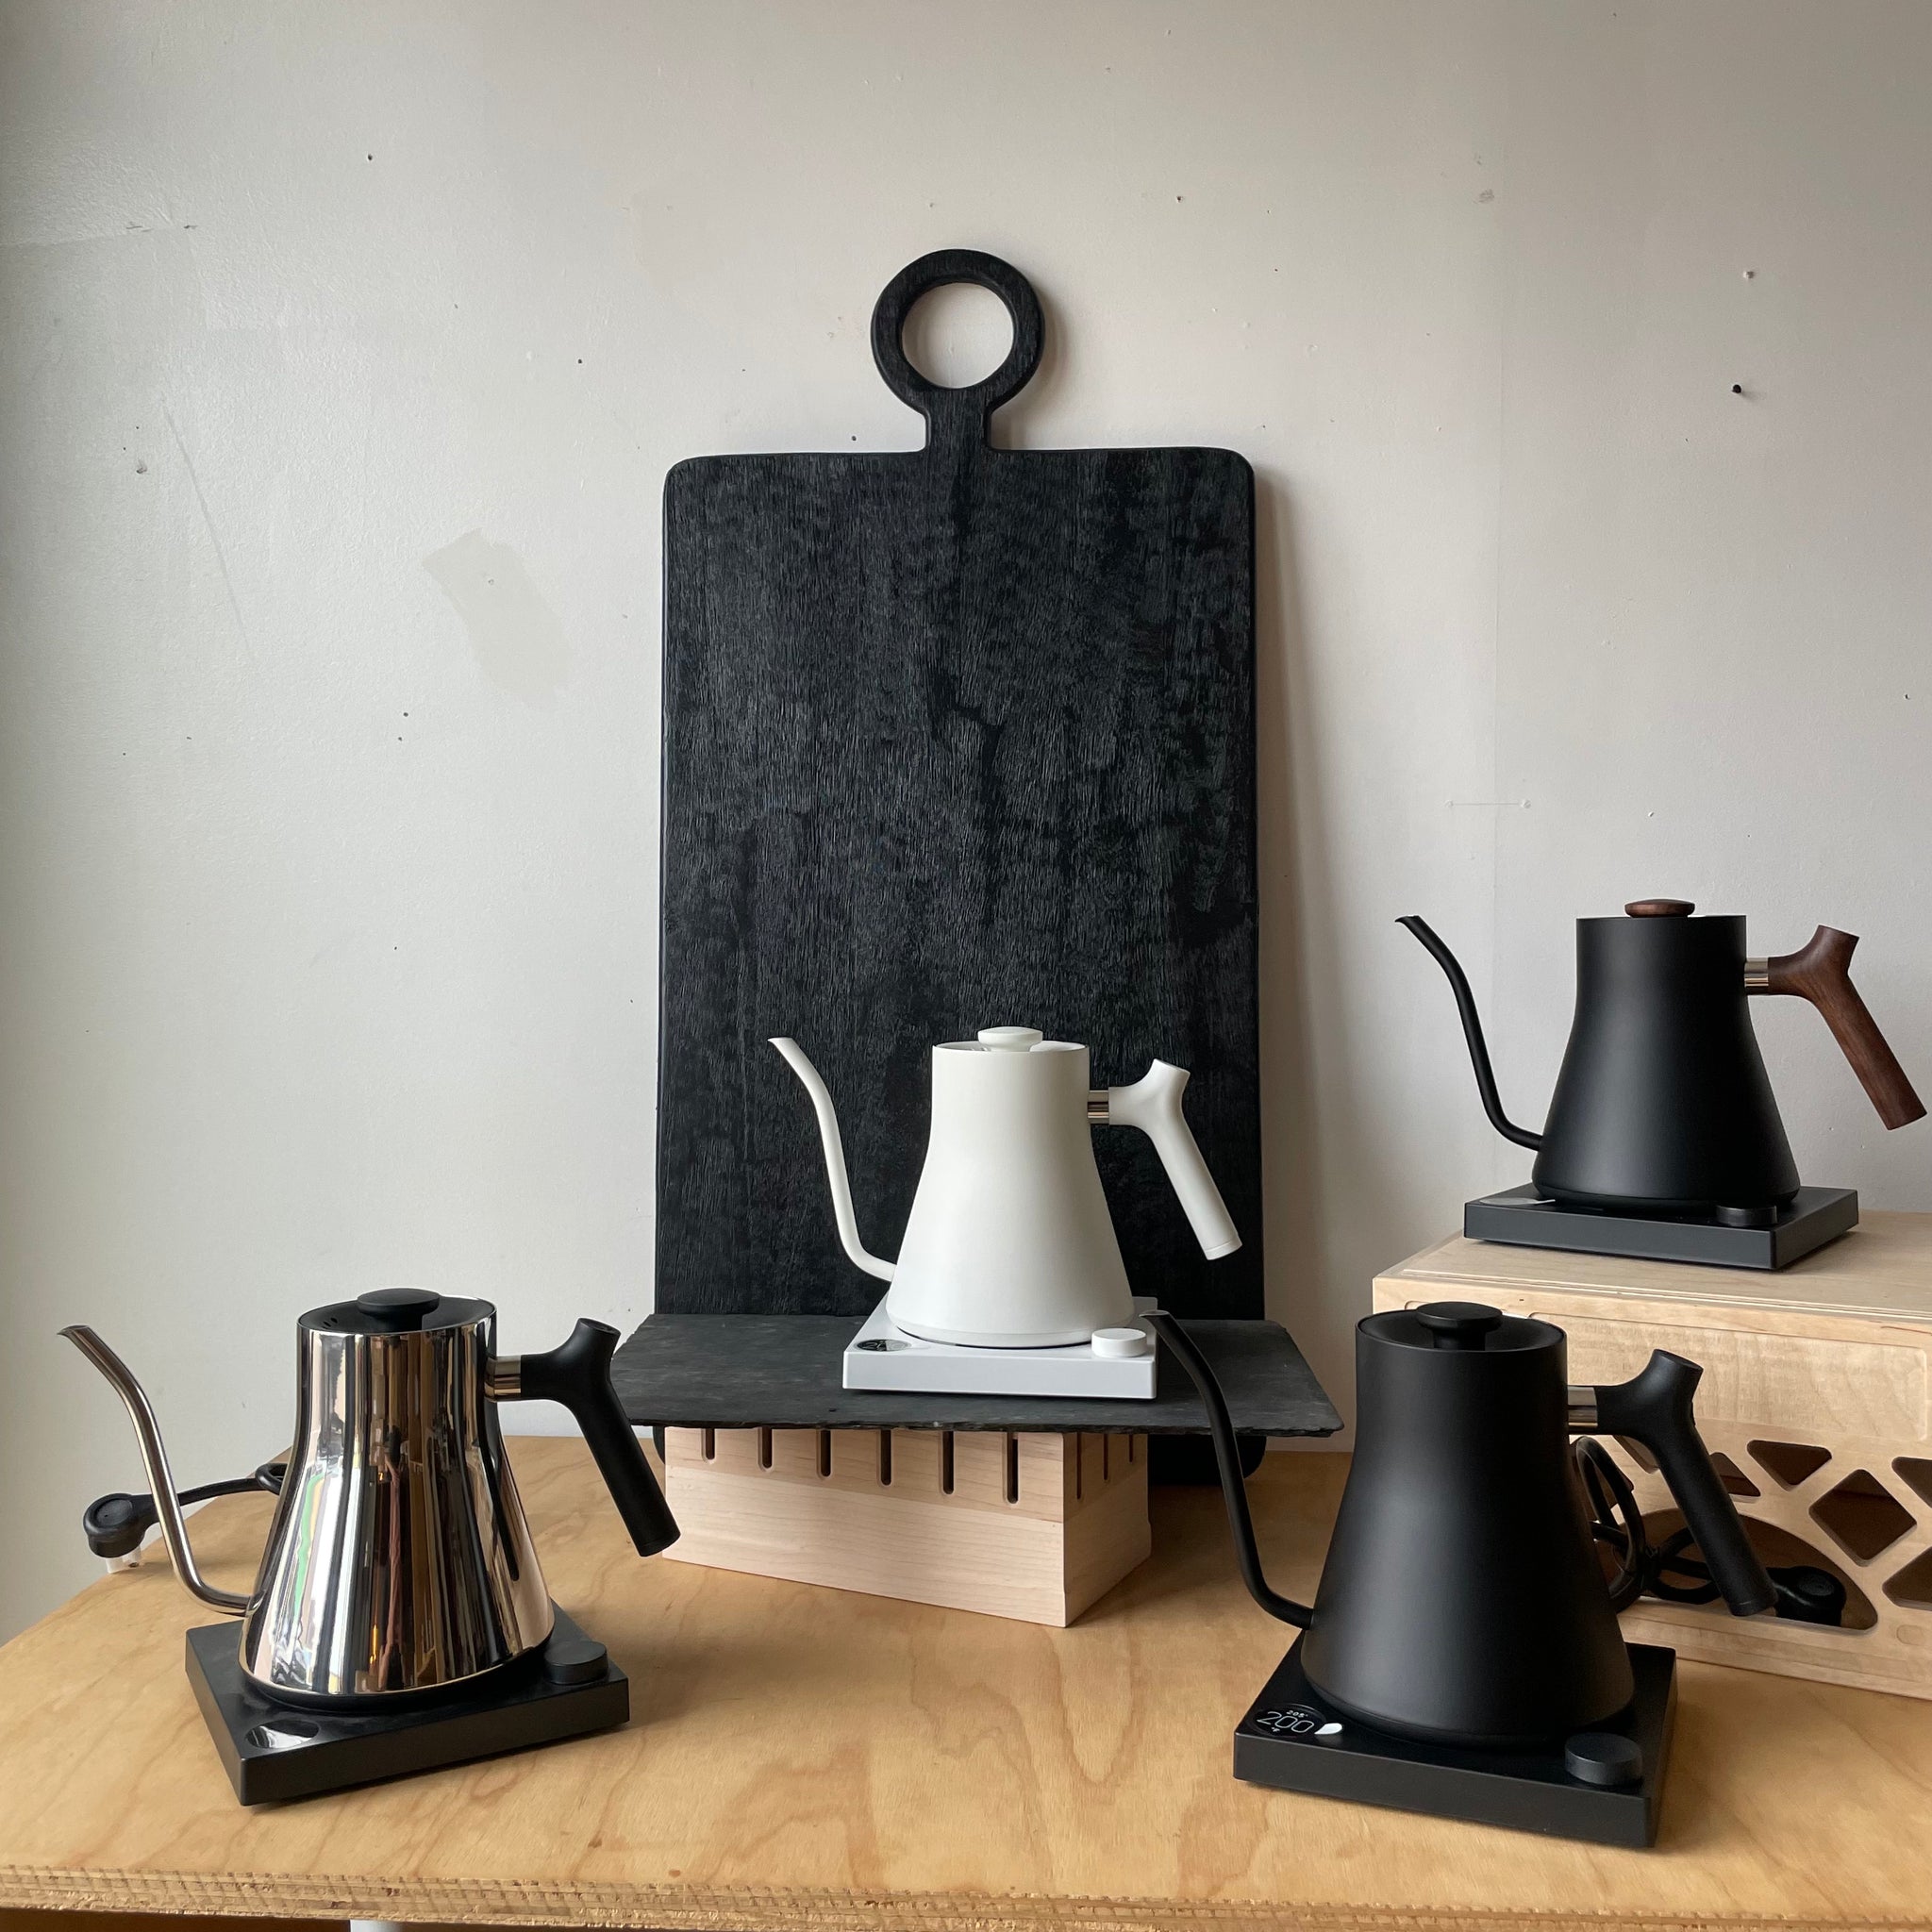 Looking at the Stagg EKG Electric Kettle by Fellow 